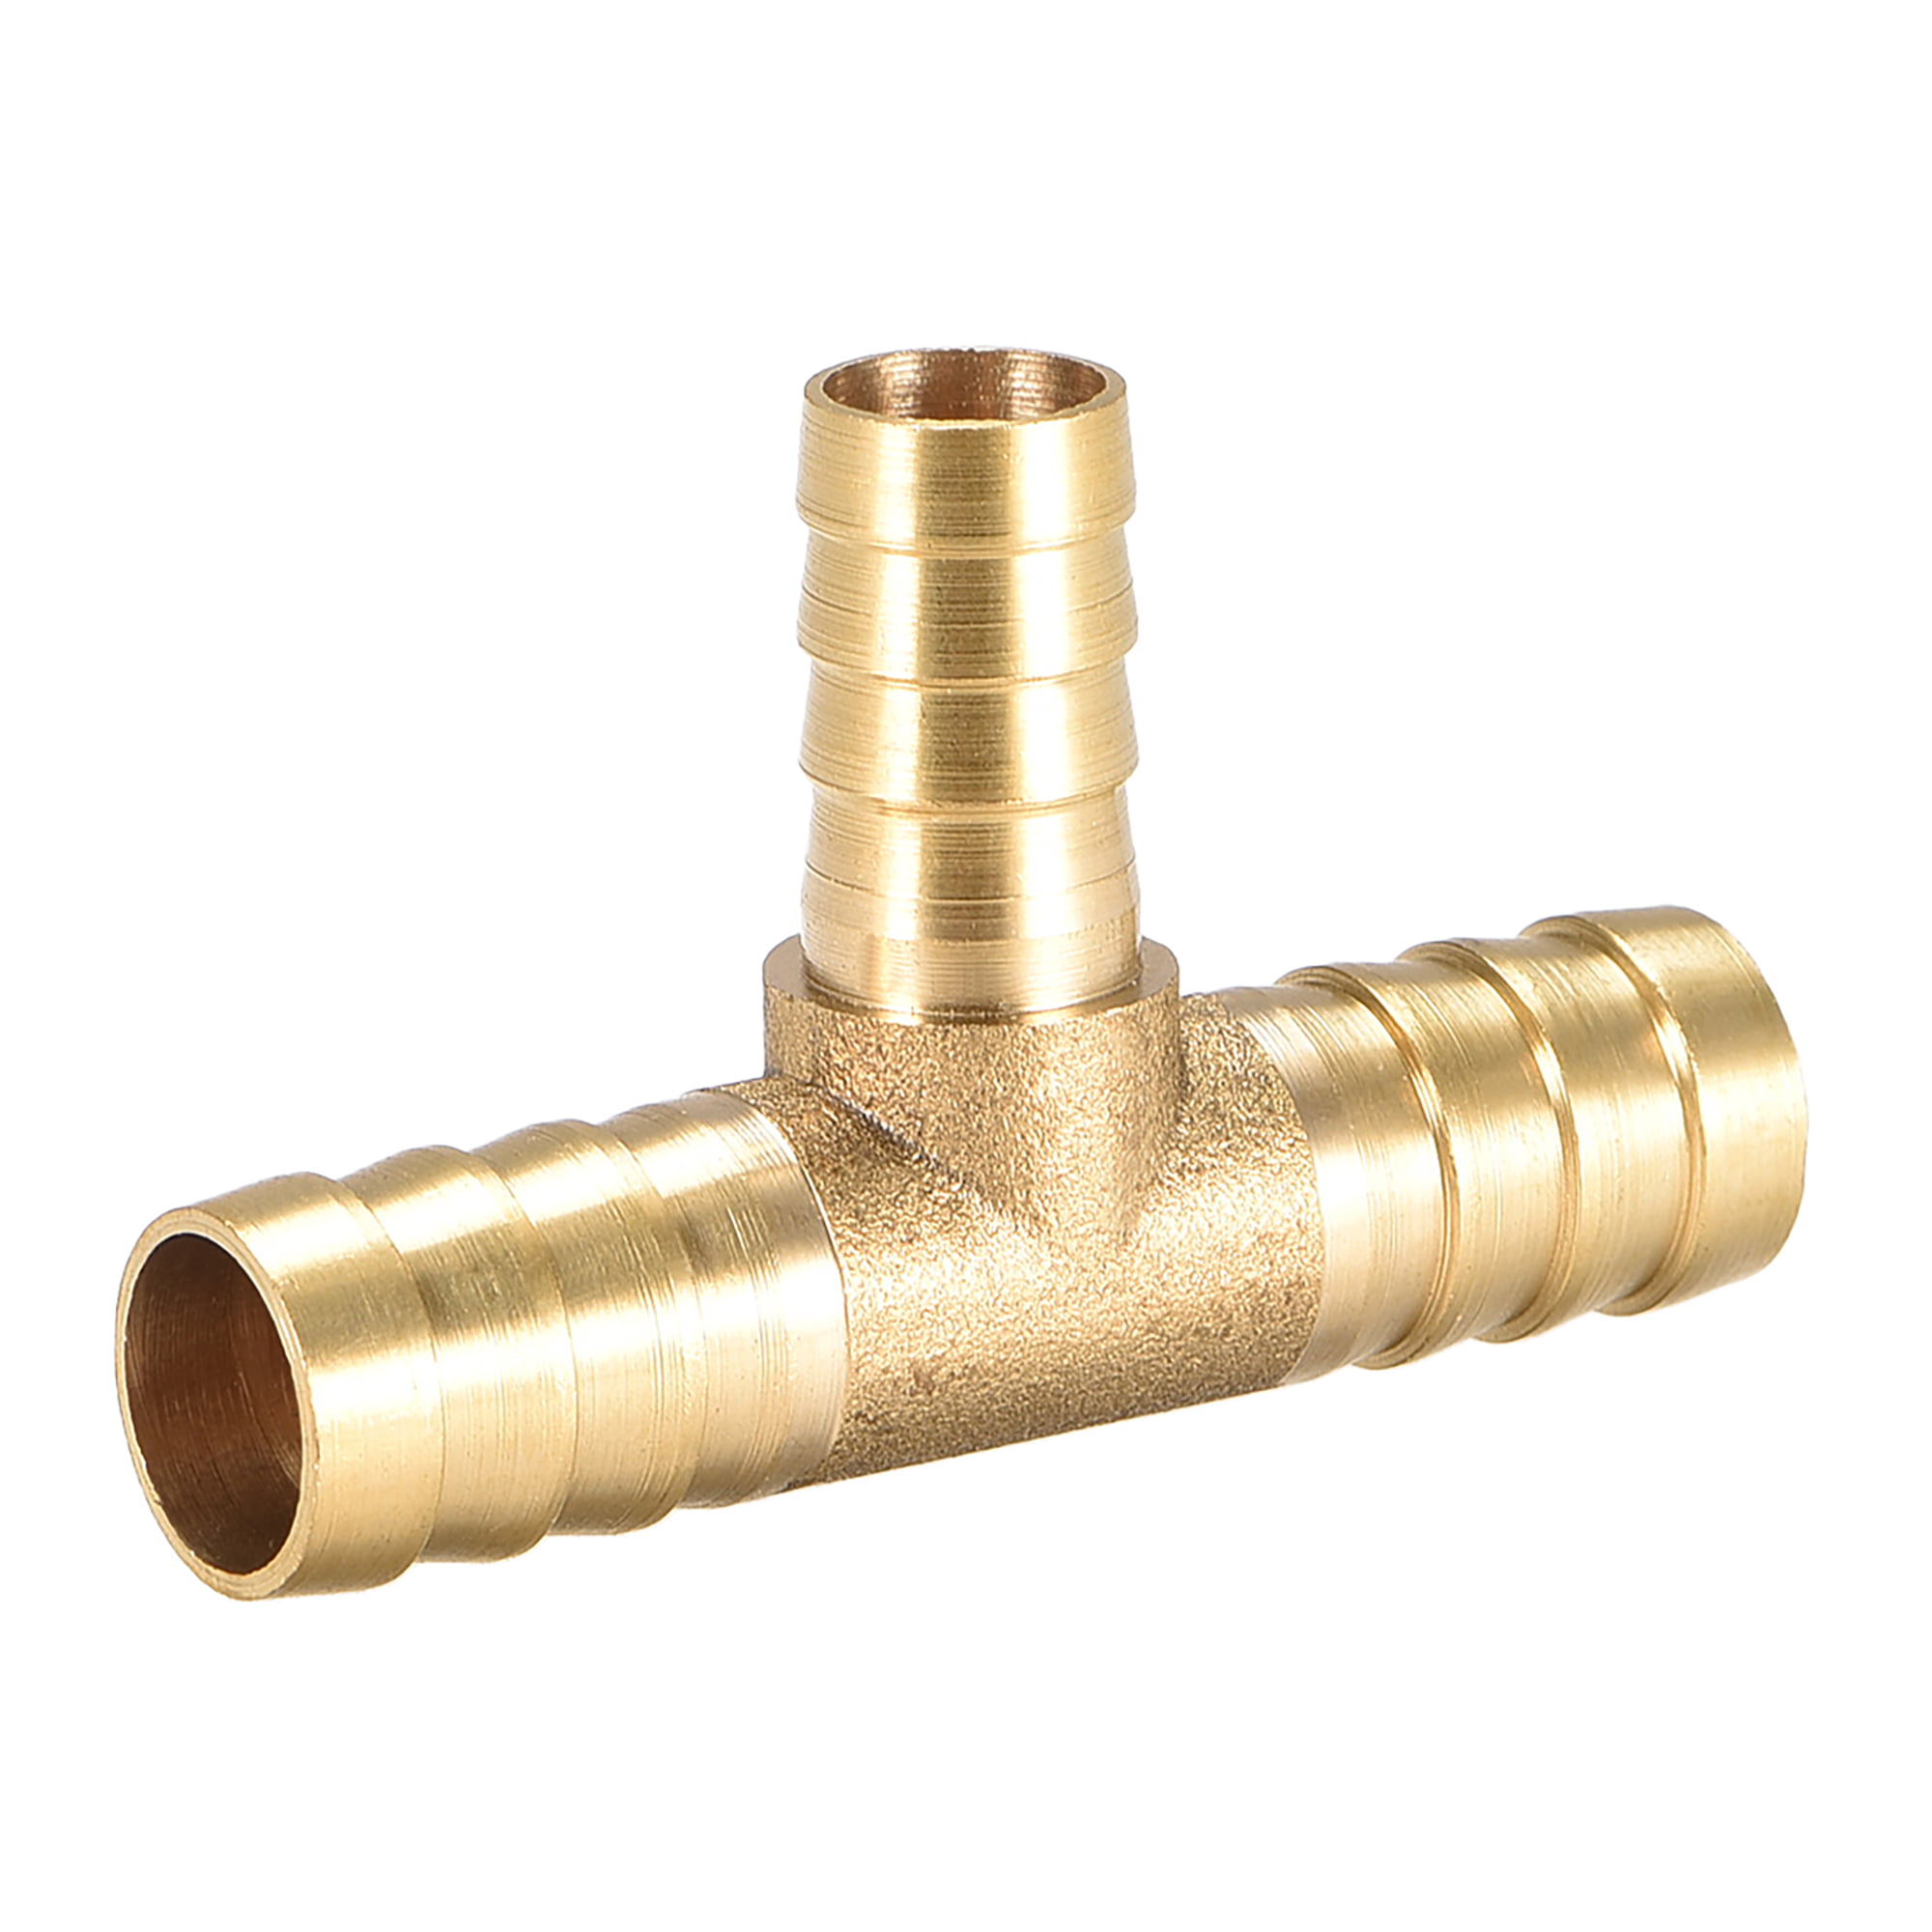 Brass 12mm Barb Tee crimp Joiner Pipe Tube Fitting 3 way tee fuel air water hose 